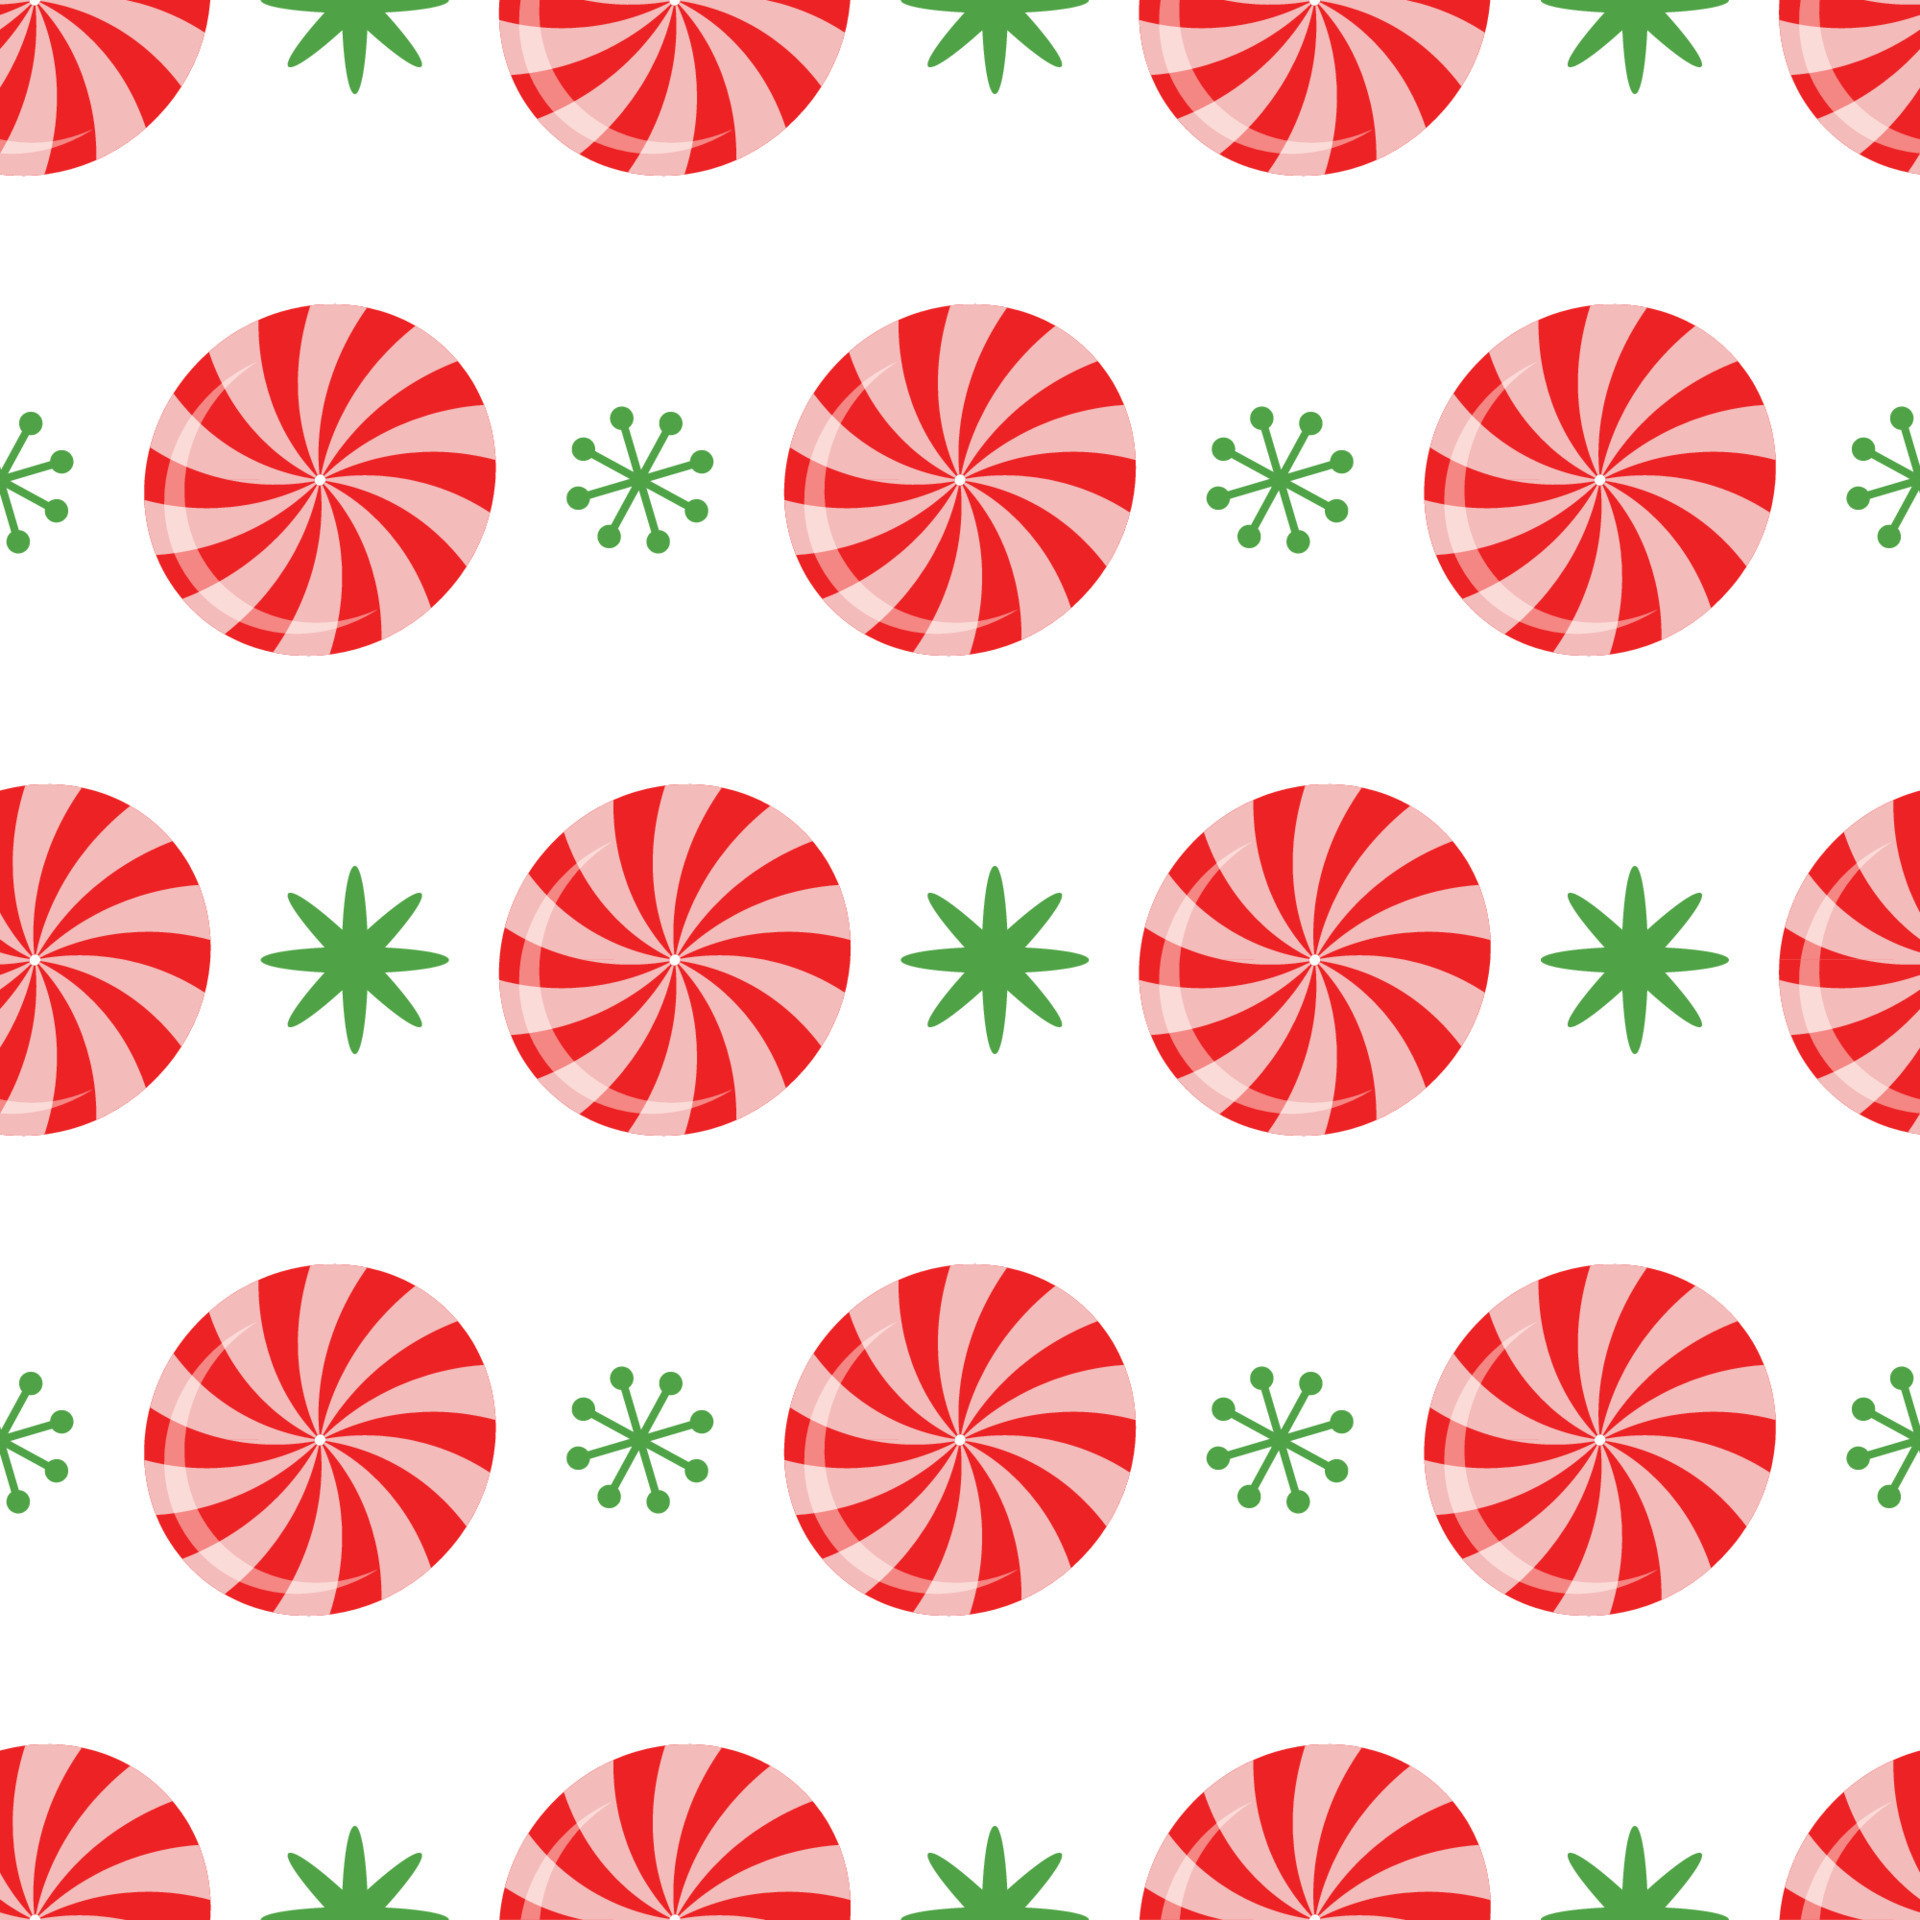 Simple classic seamless Christmas pattern. Traditional green, red